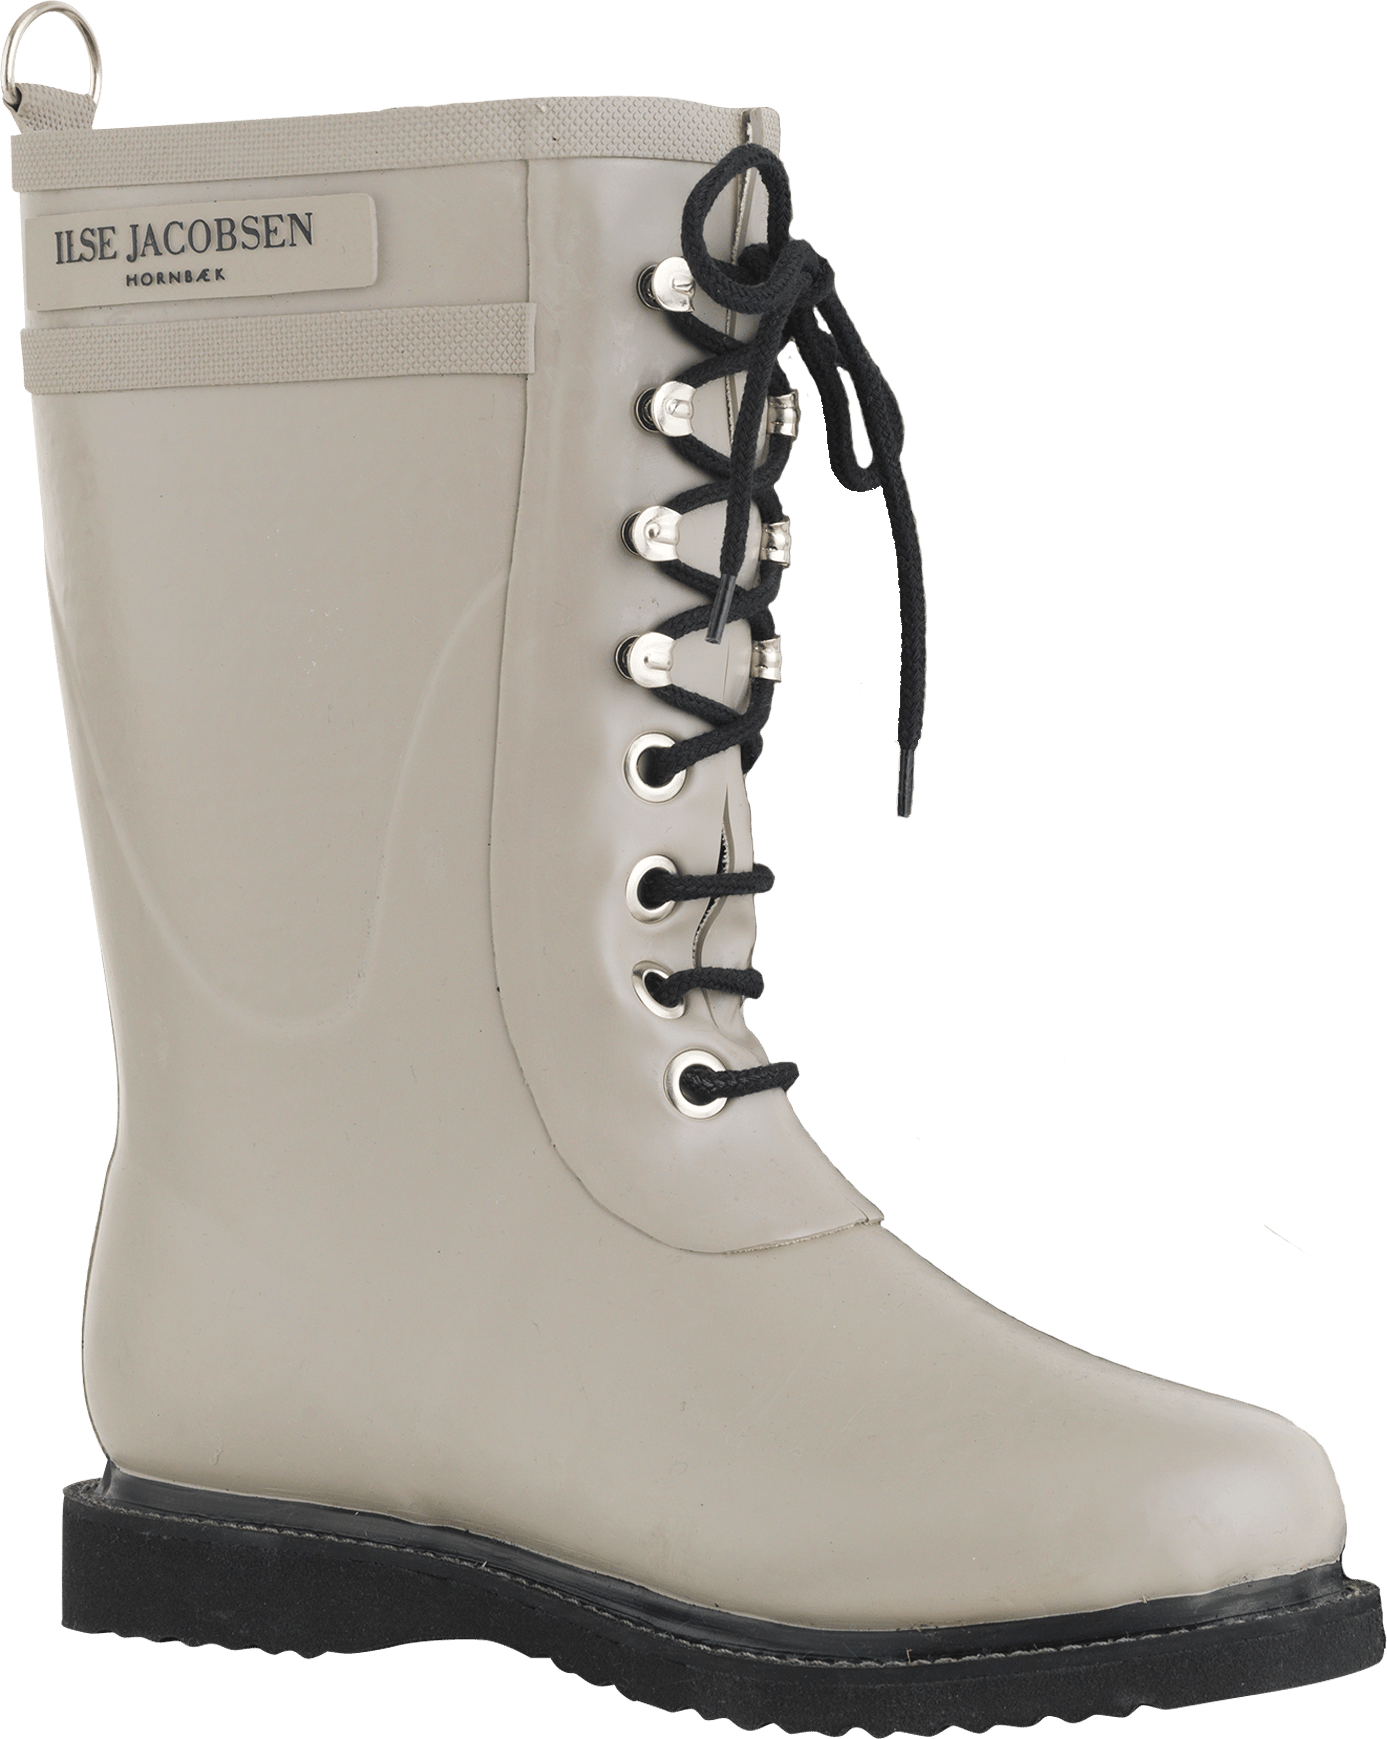 Women's 3/4 Rubber Boots Atmosphere